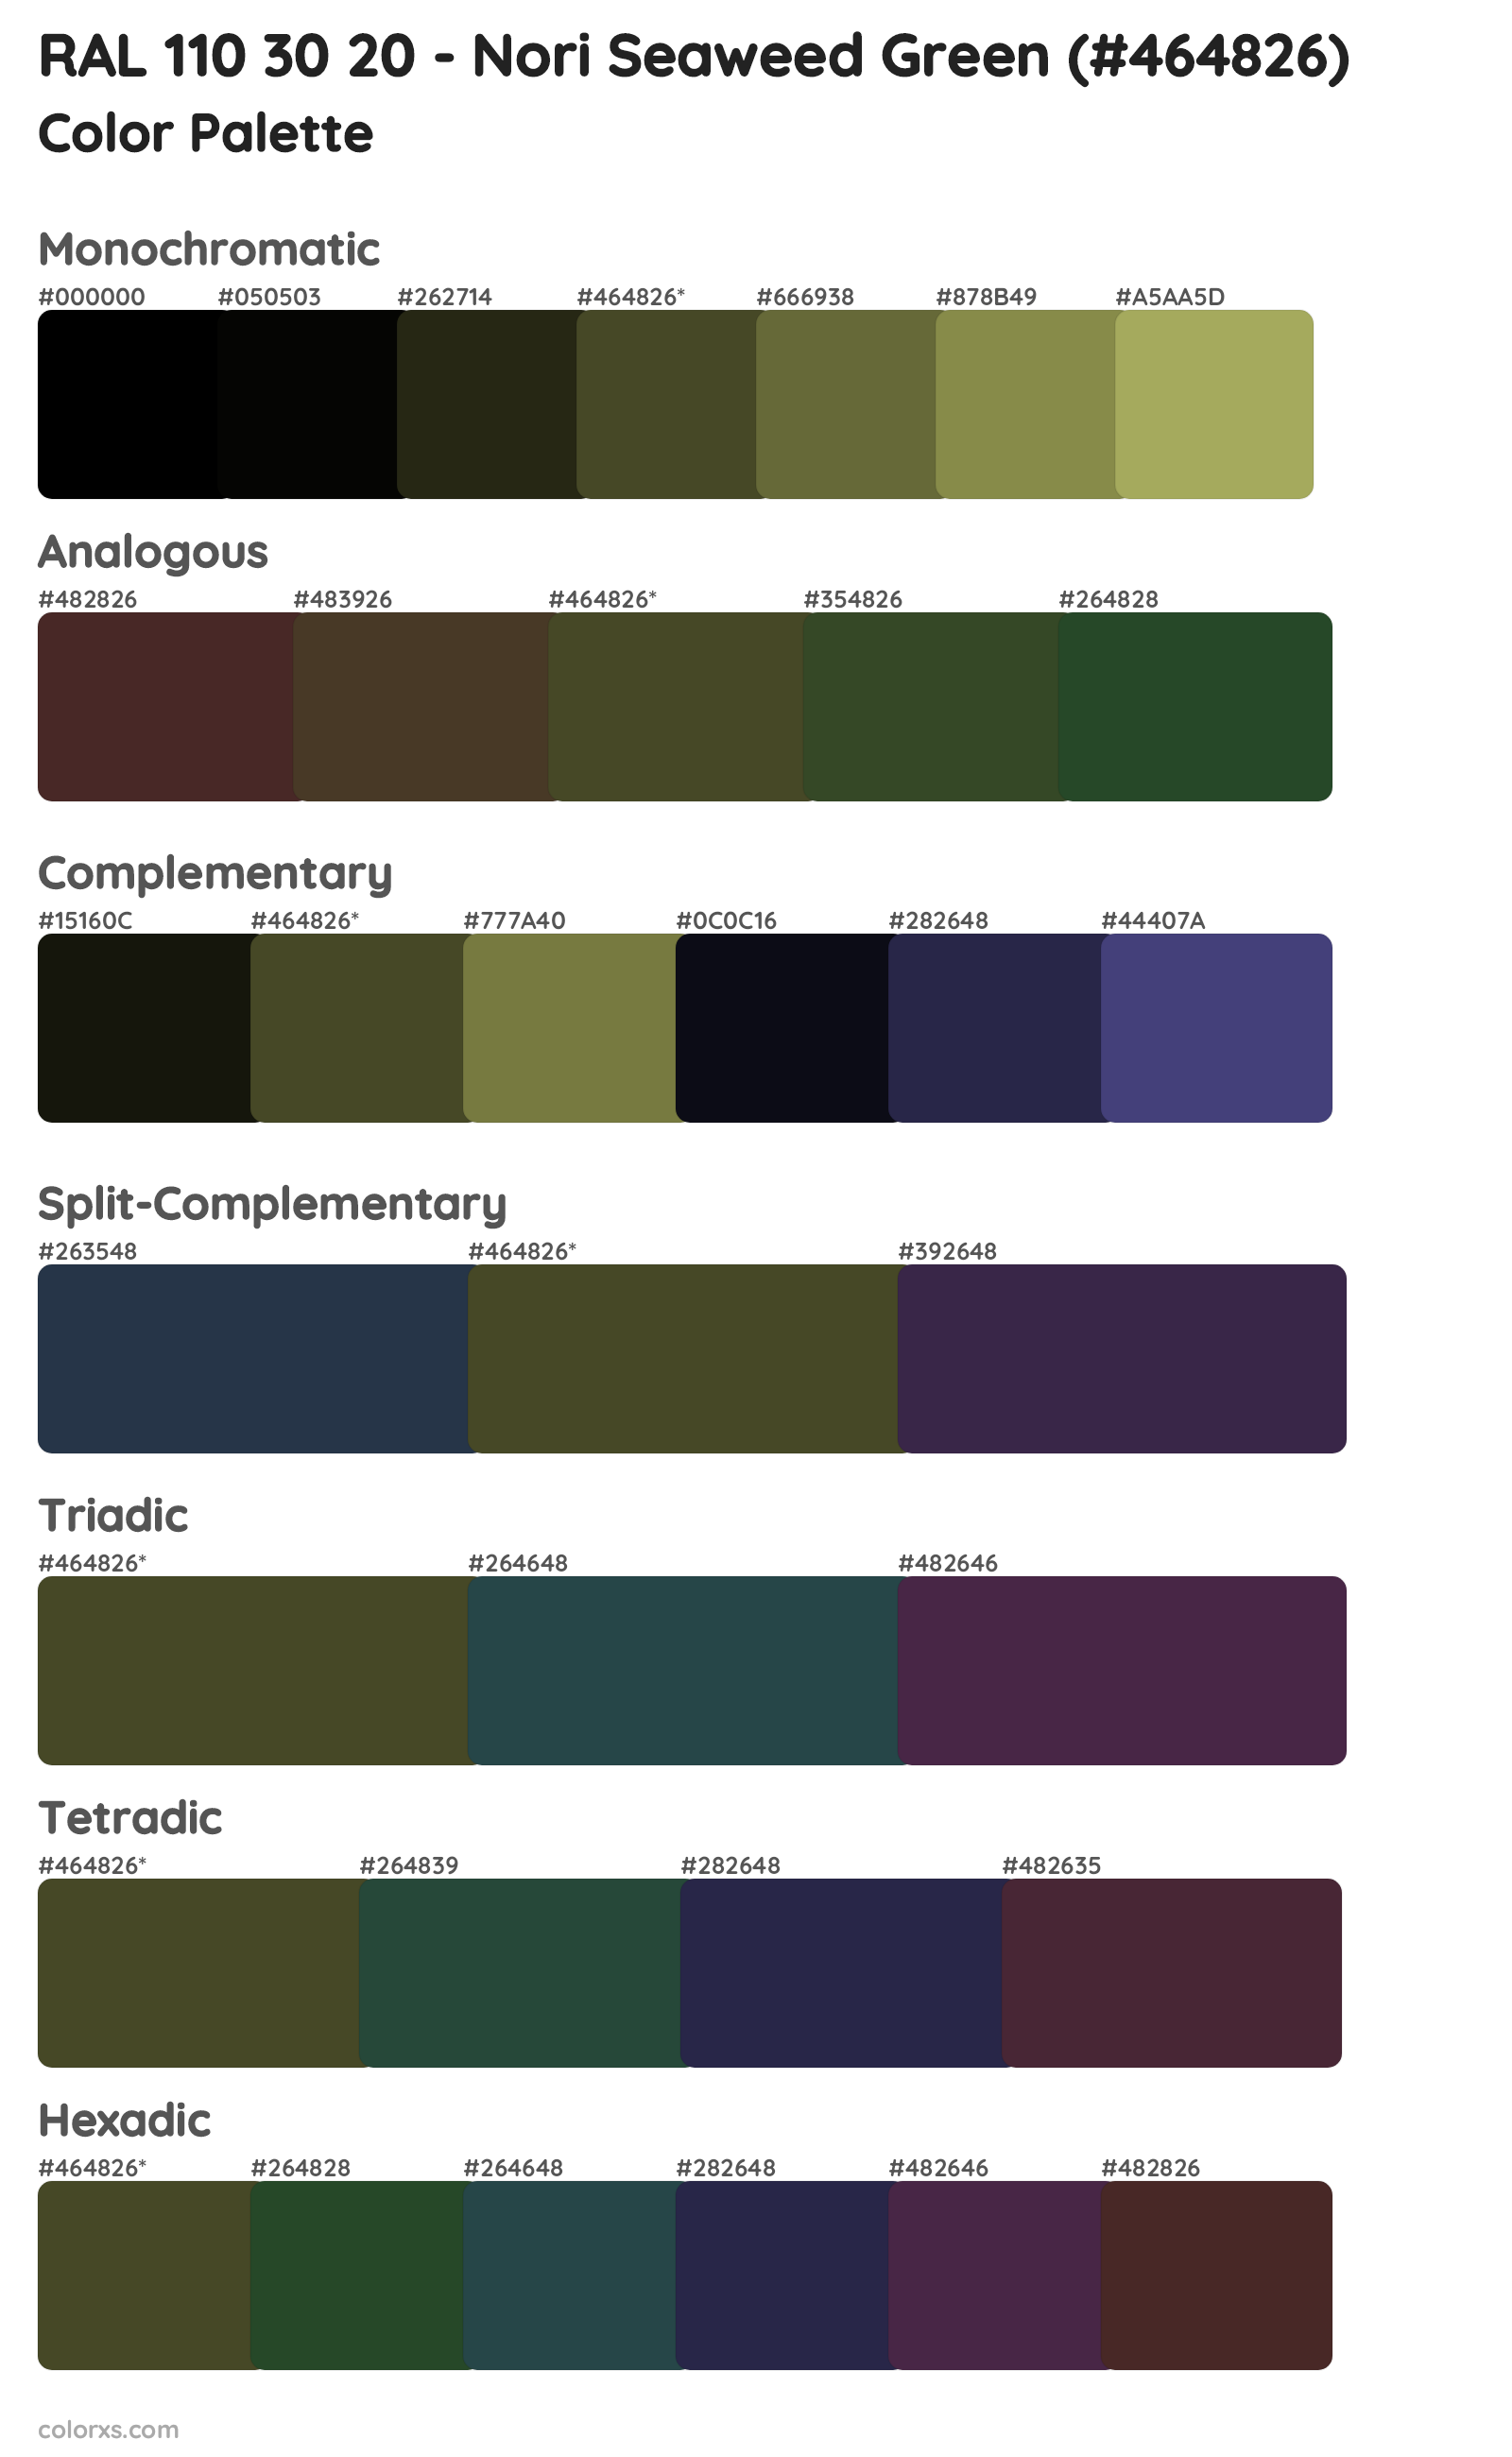 RAL 110 30 20 - Nori Seaweed Green Color Scheme Palettes